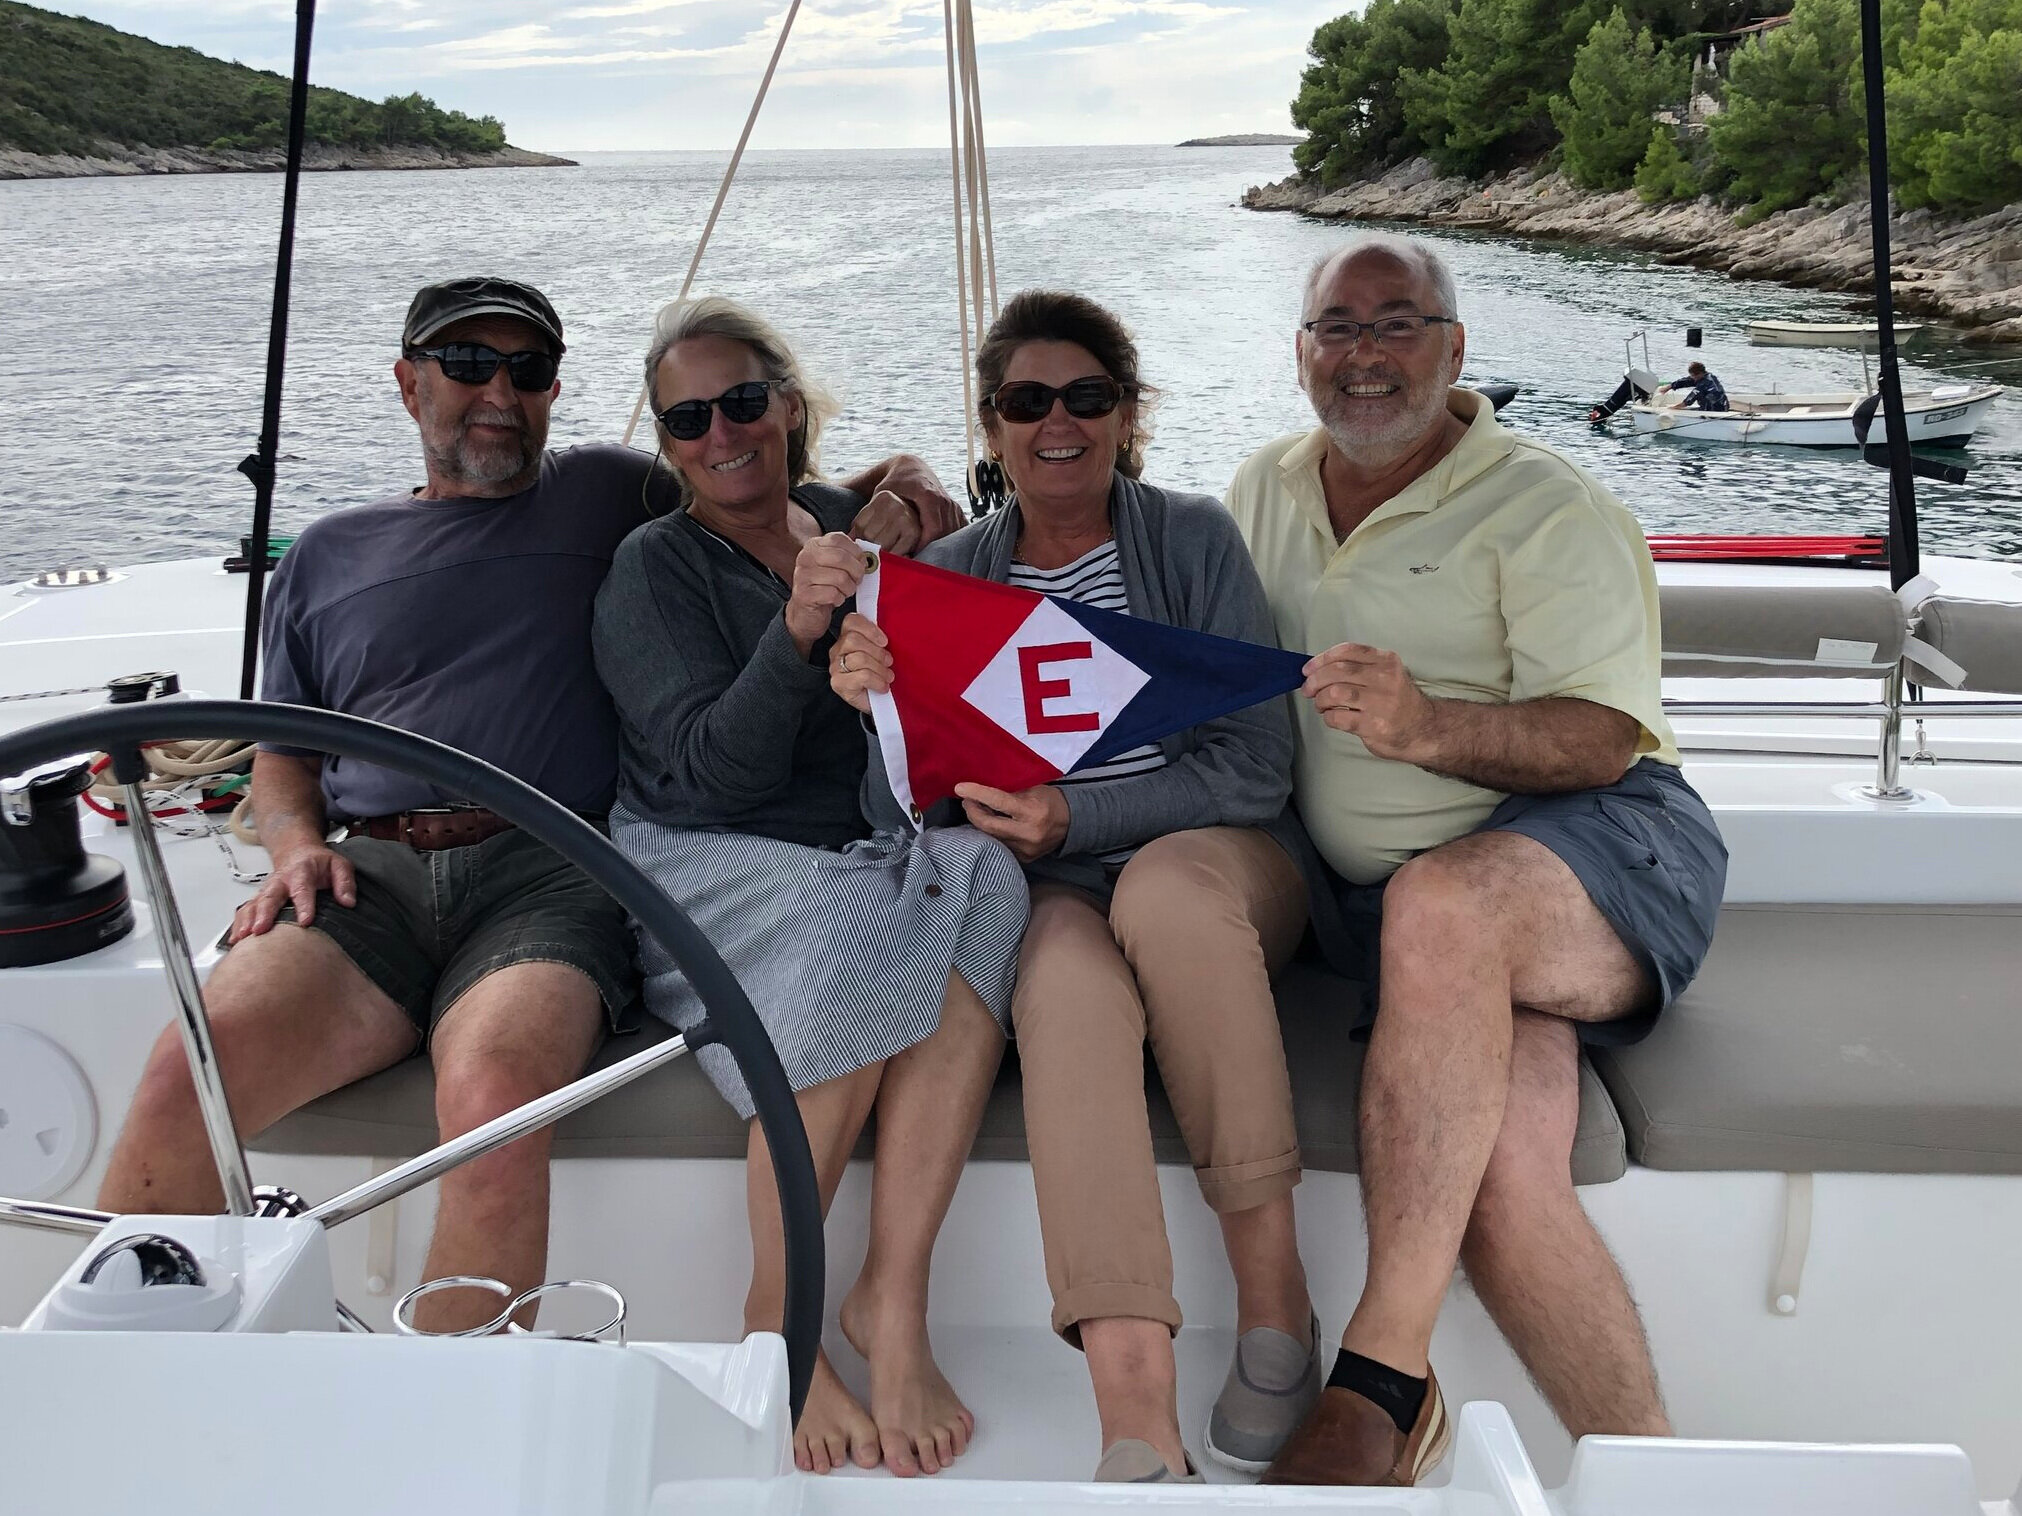  René and Lynne and Shelley and Nick show their EYC pride while cruising off the Dalmatian coast in Croatia 